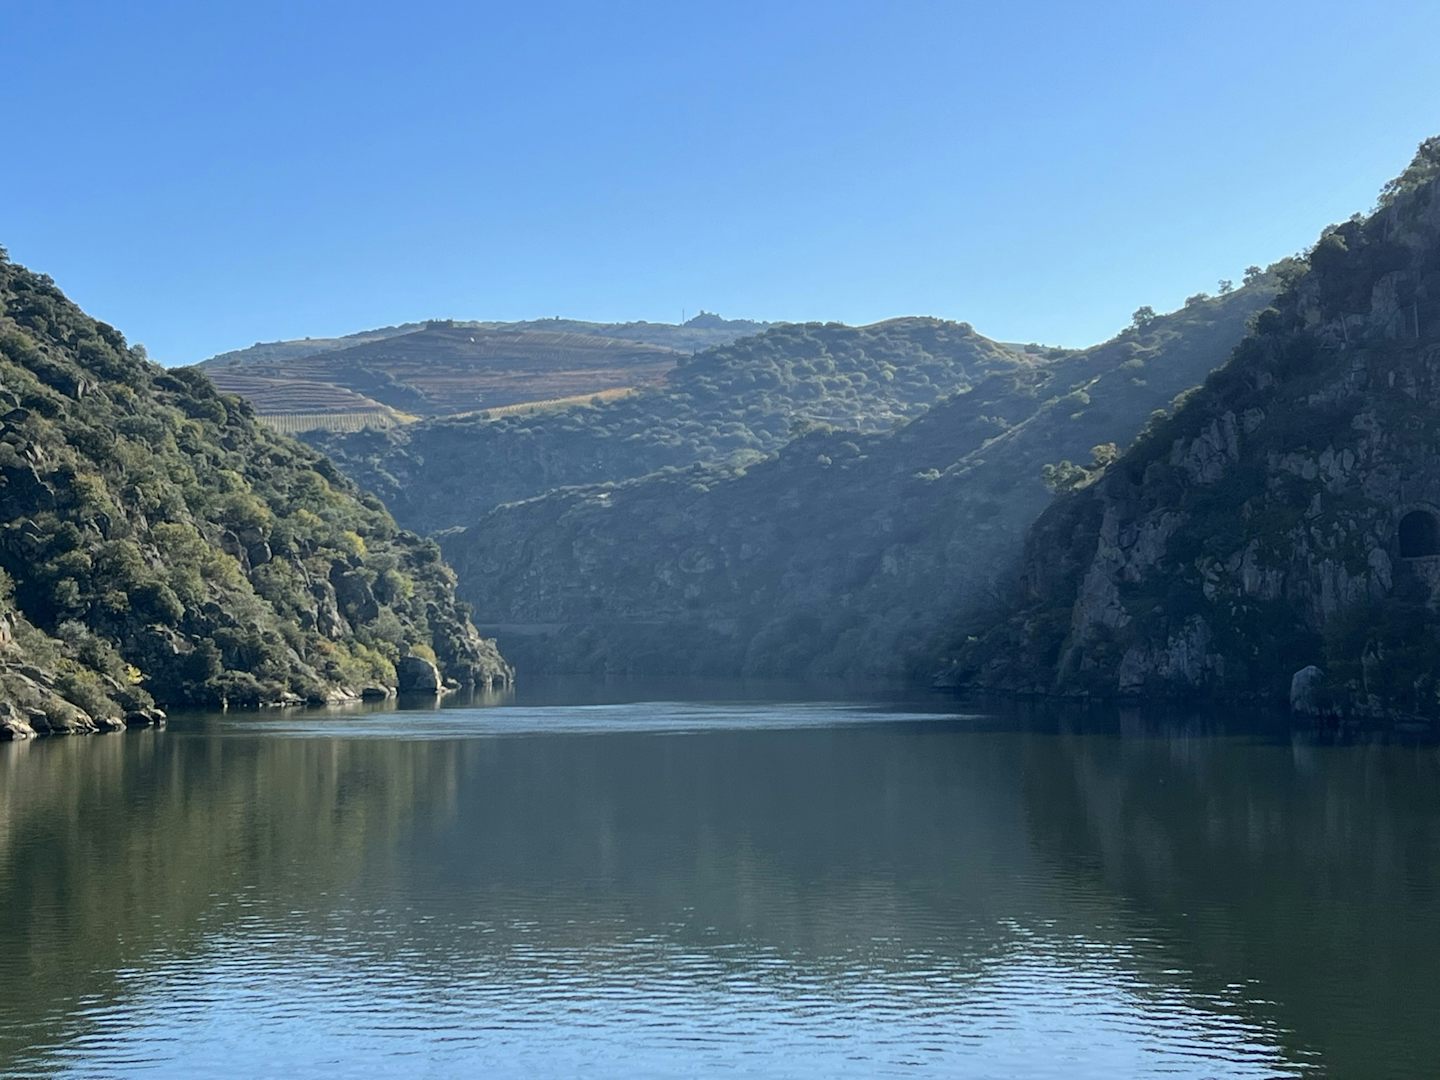 Taken from the upper deck headed east on the Douro River in Portugal.